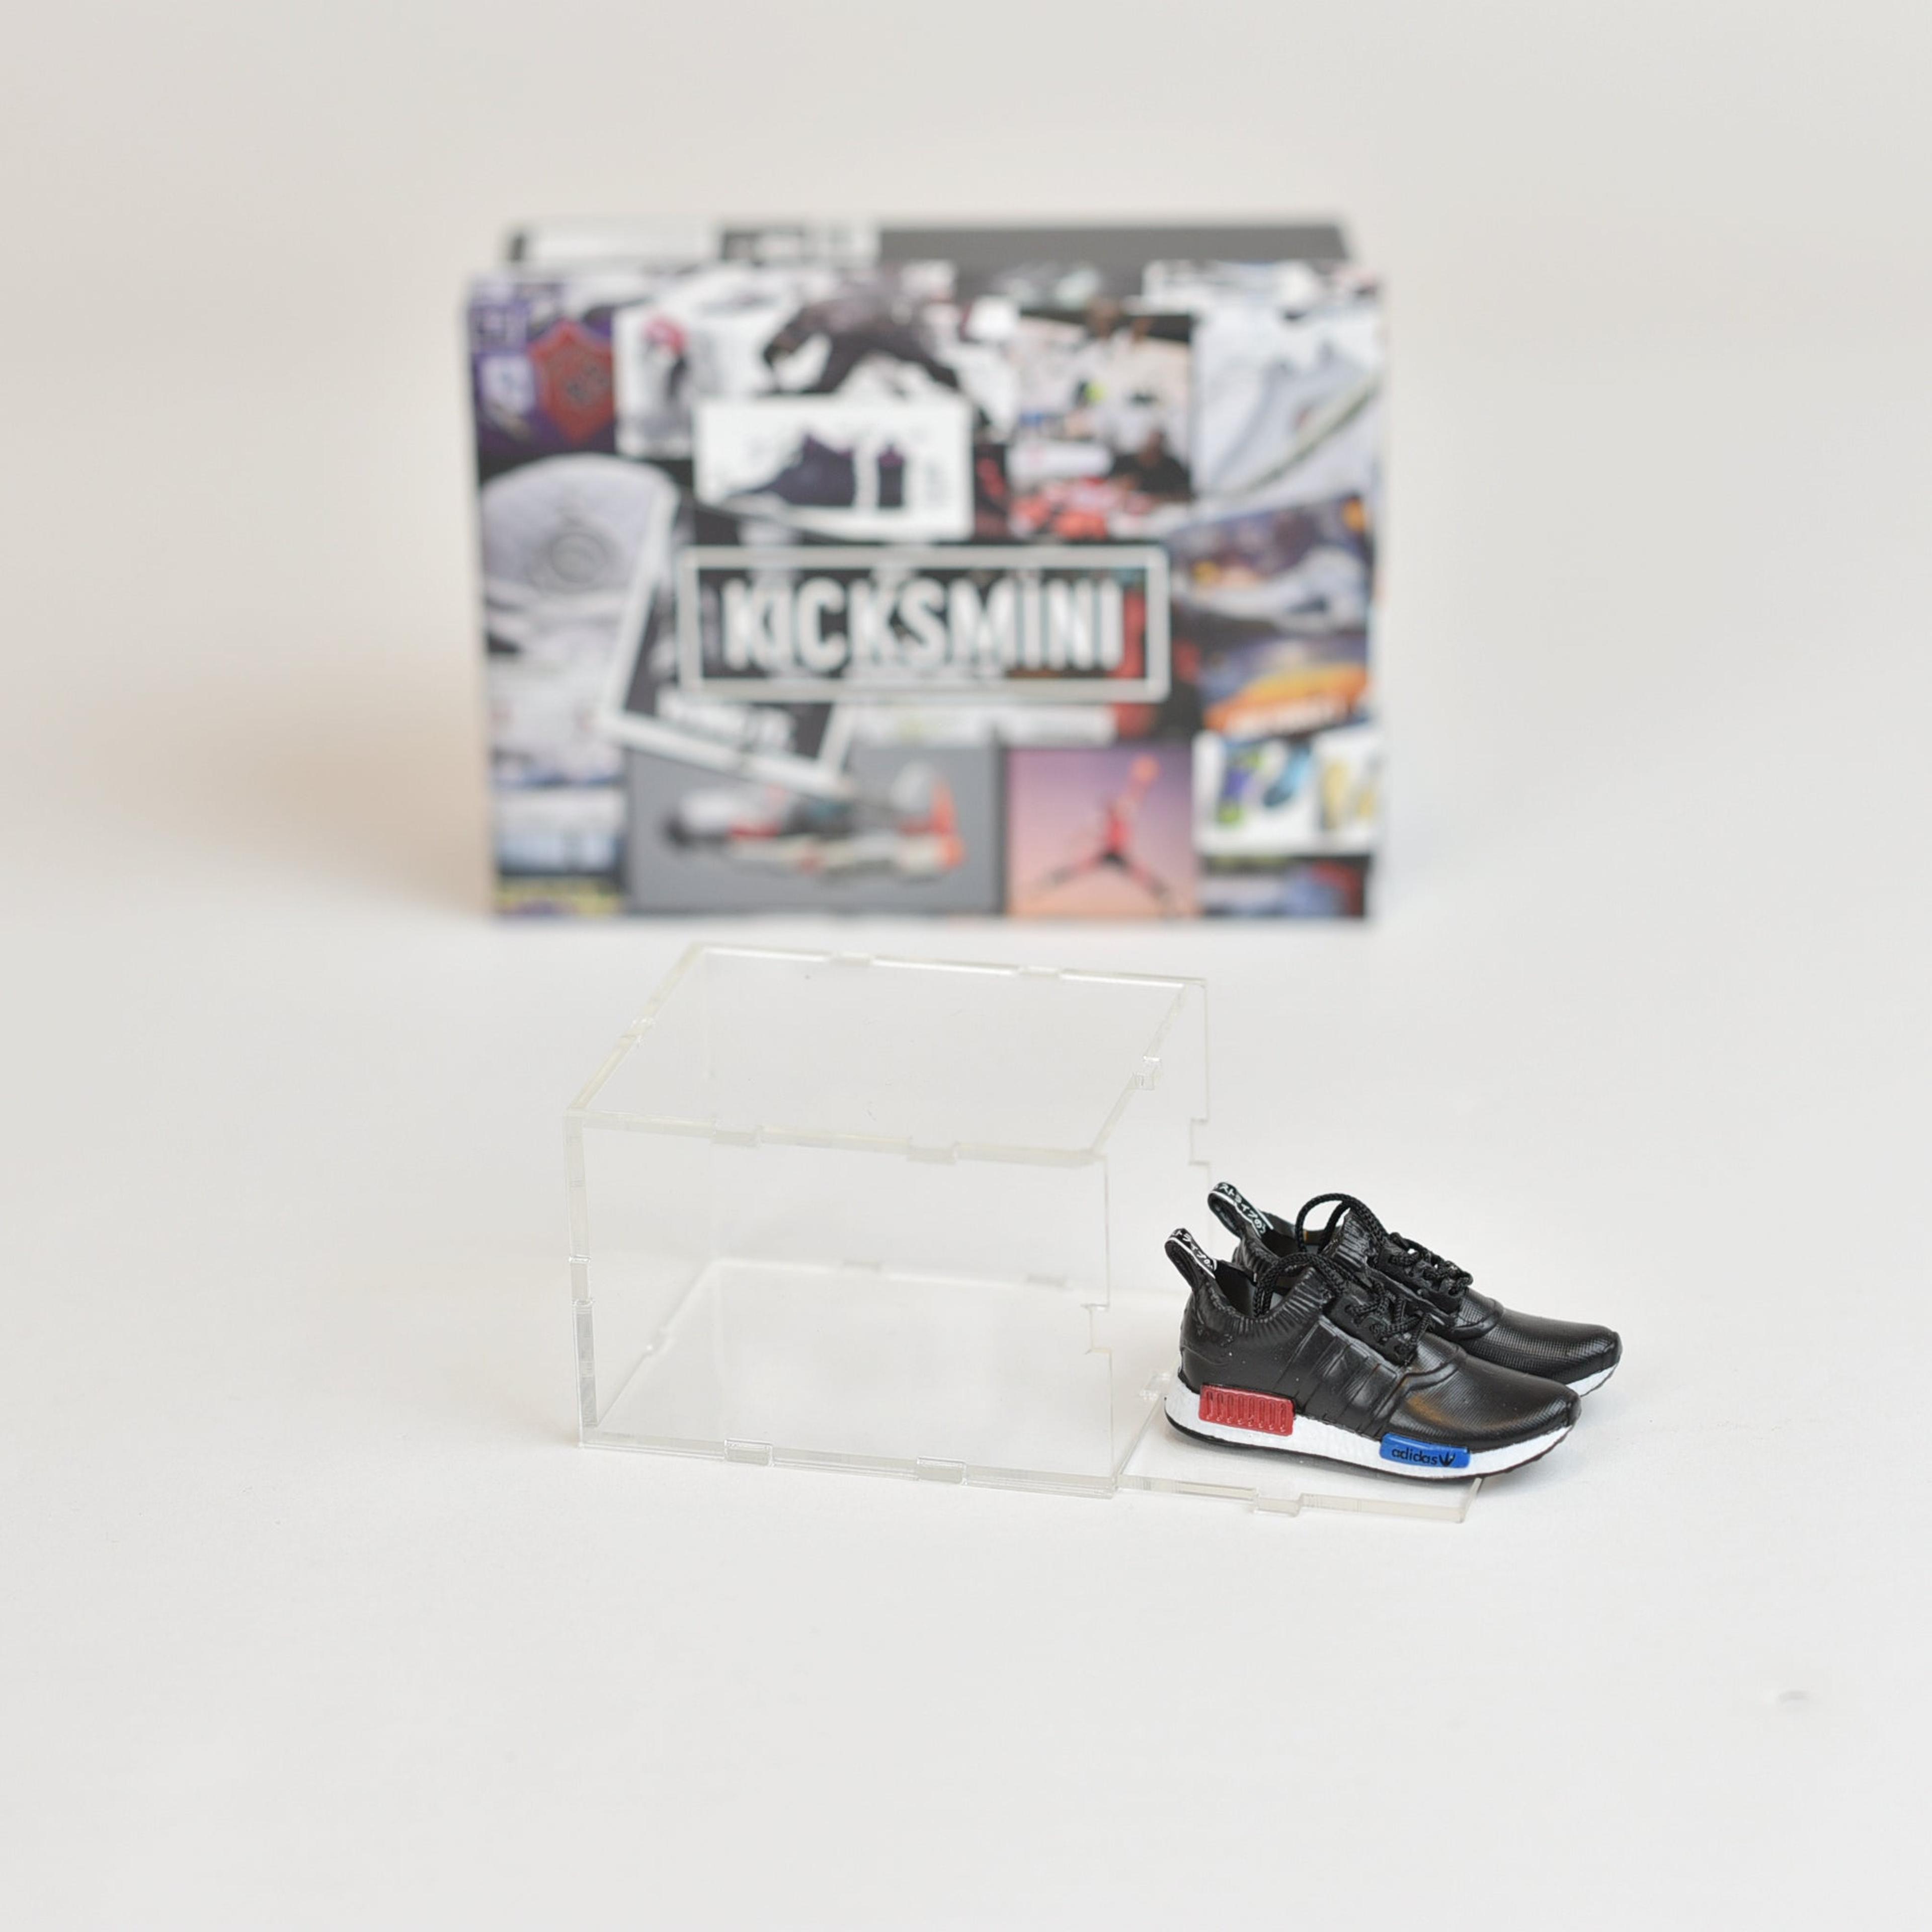 Alternate View 25 of Yeezy/NMD Mini Sneakers Collection with Display Case